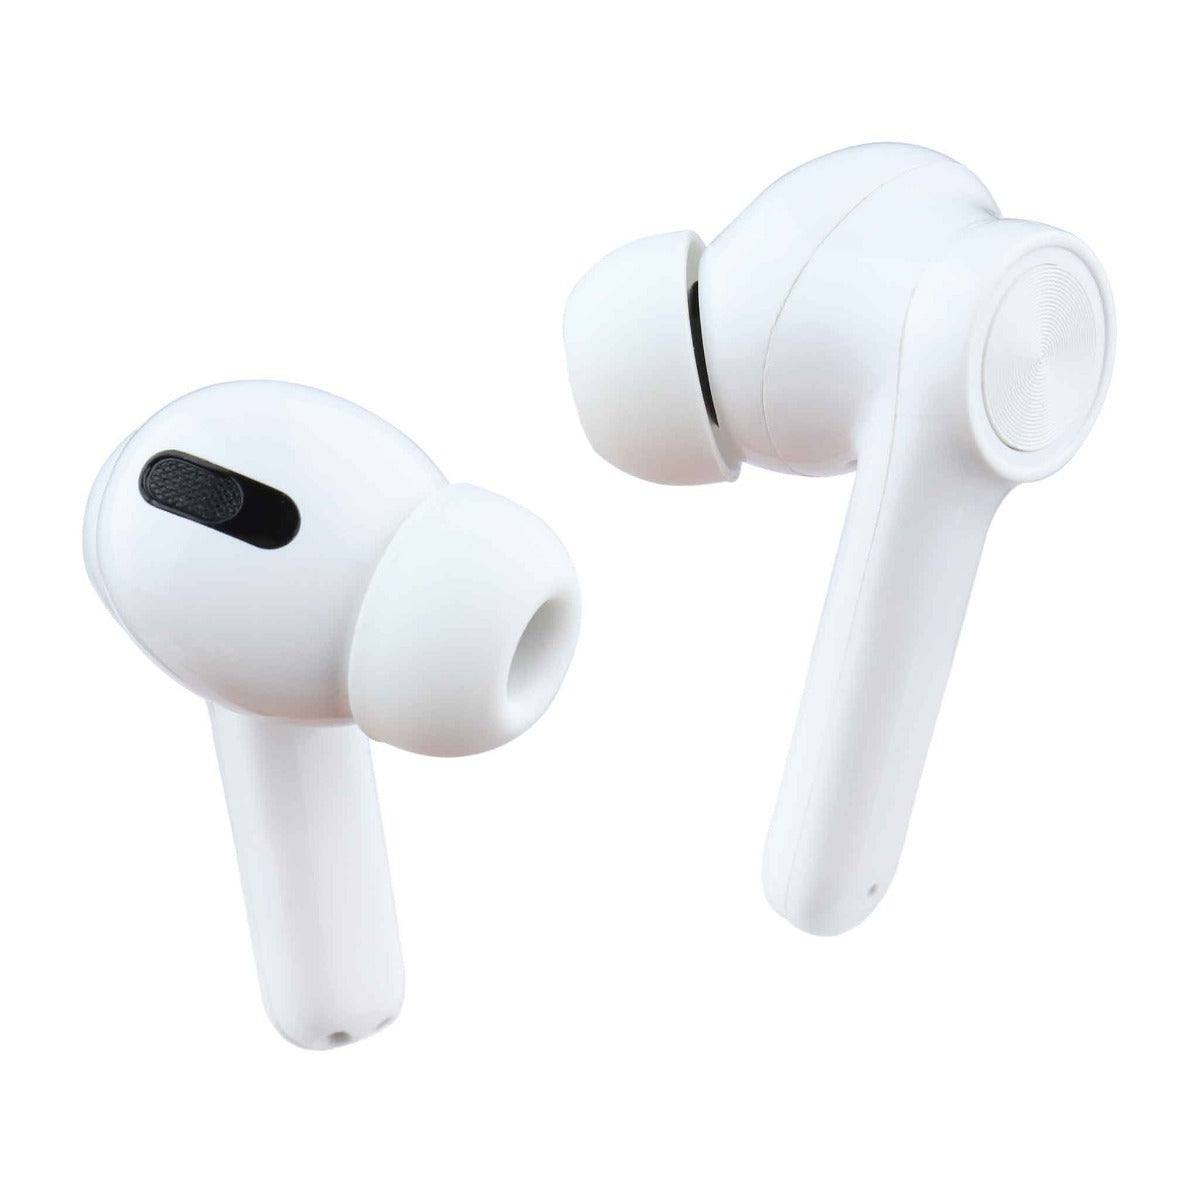 Kuurapods PRO V2 White - true wireless earbuds with active noise cancellation